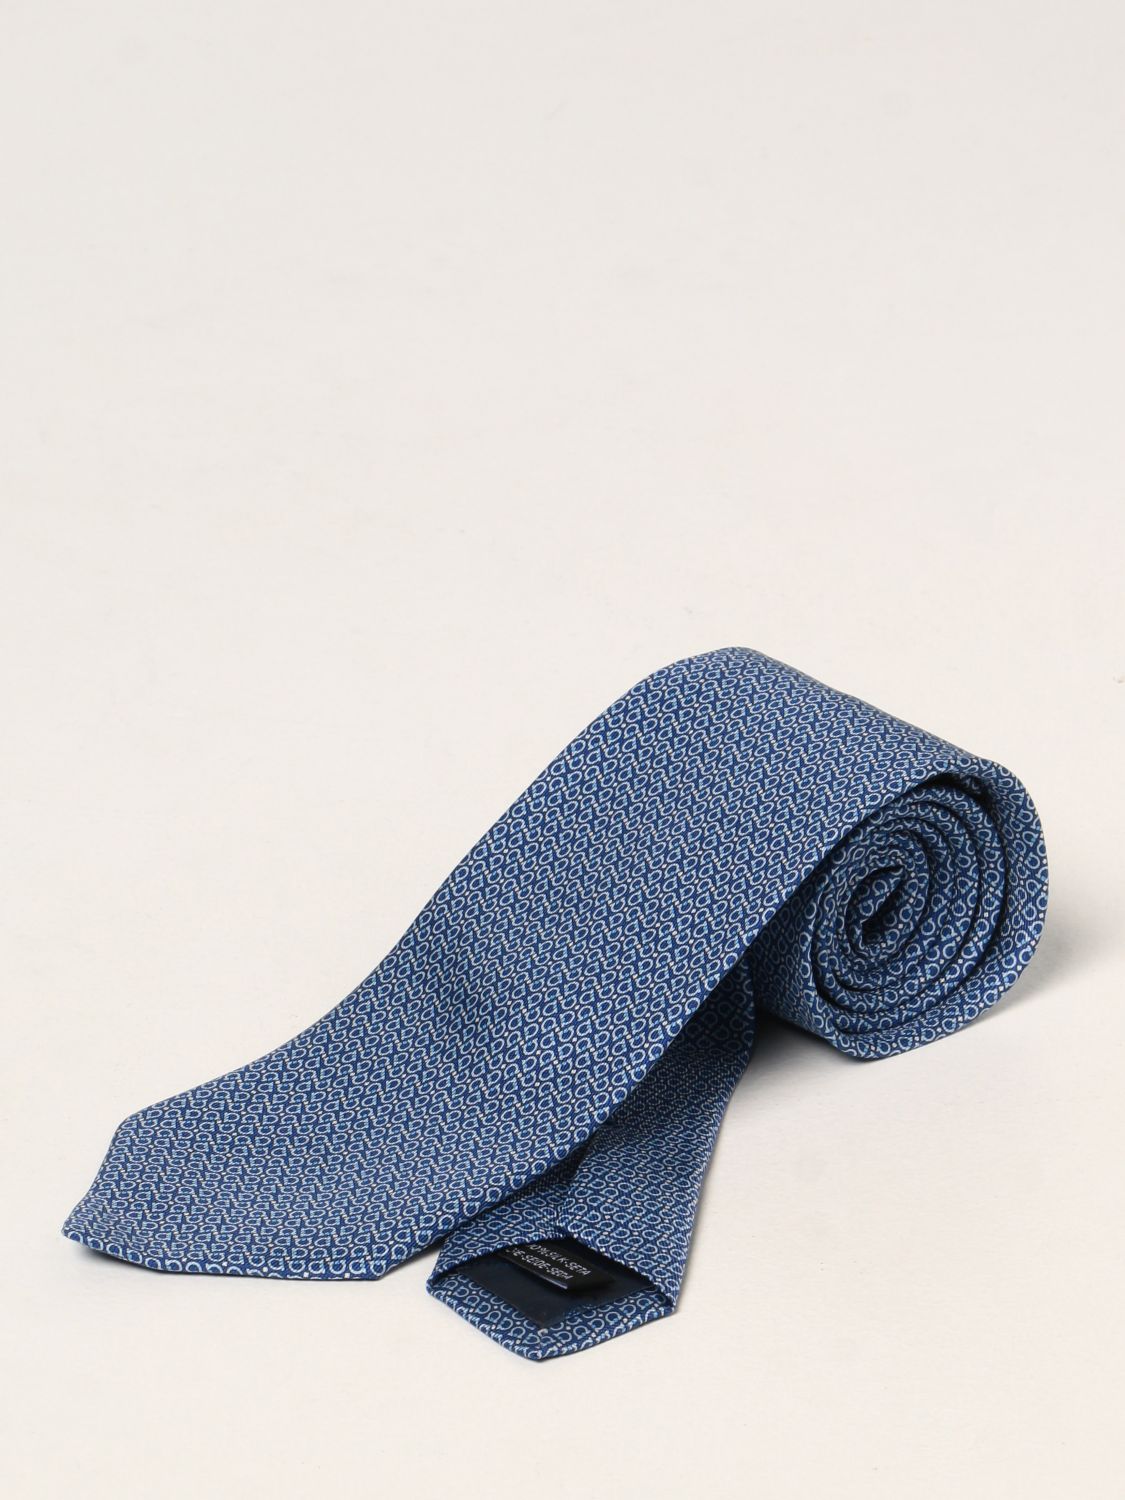 Tie Salvatore Ferragamo: Salvatore Ferragamo silk tie with micro Gancini blue 1